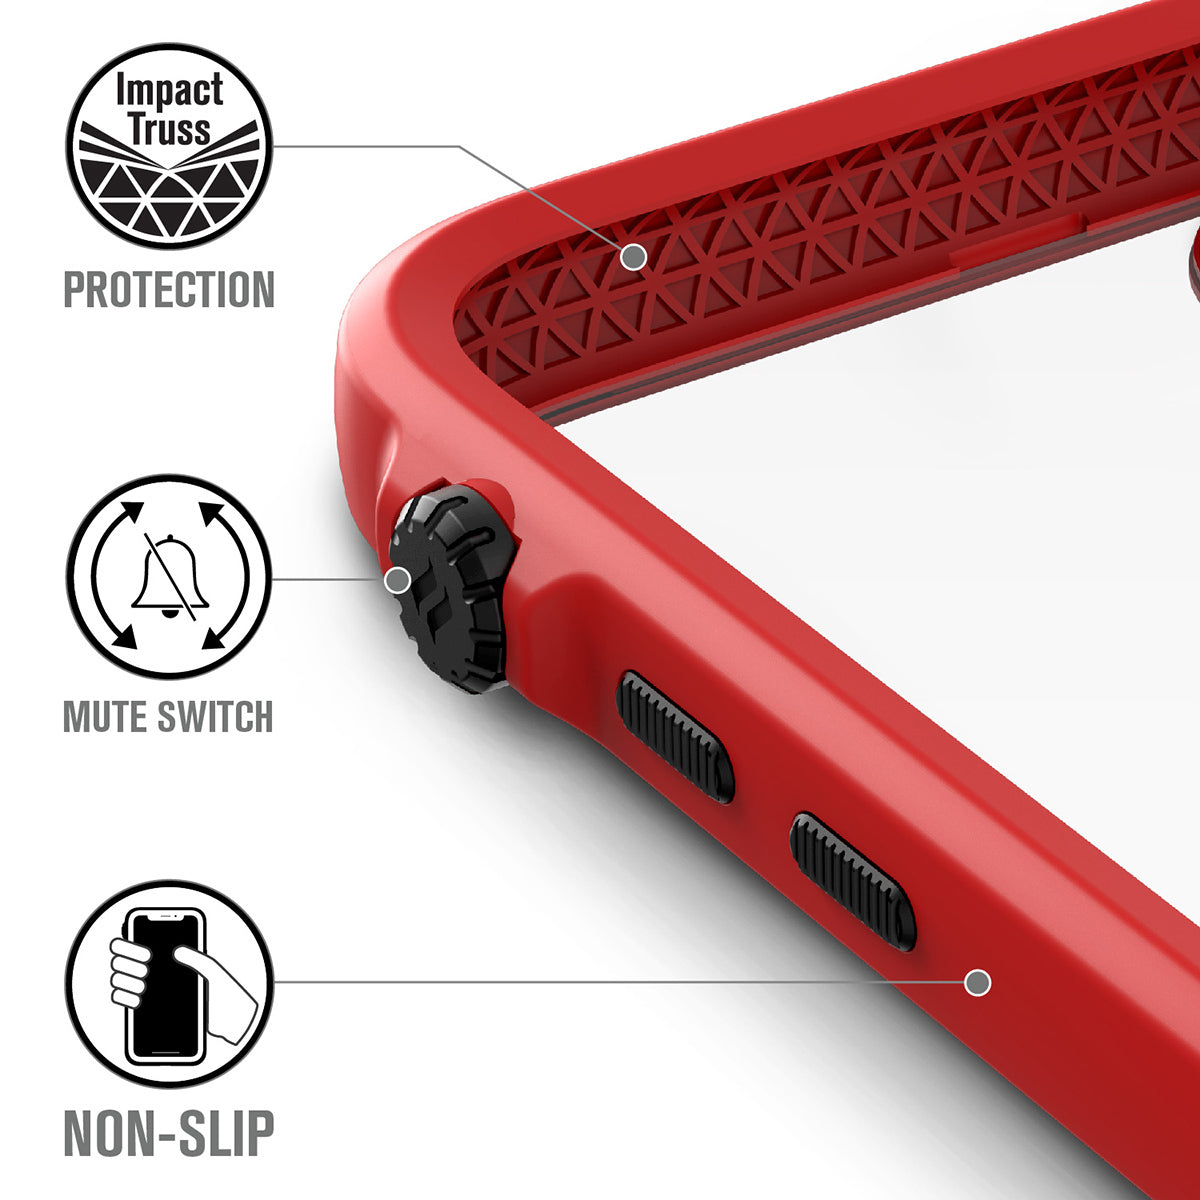 catalyst iPhone 11 series impact protection case flame red showing the impact truss mute switch and buttons of the case for iPhone 11 text reads impact truss protection mute switch non-slip